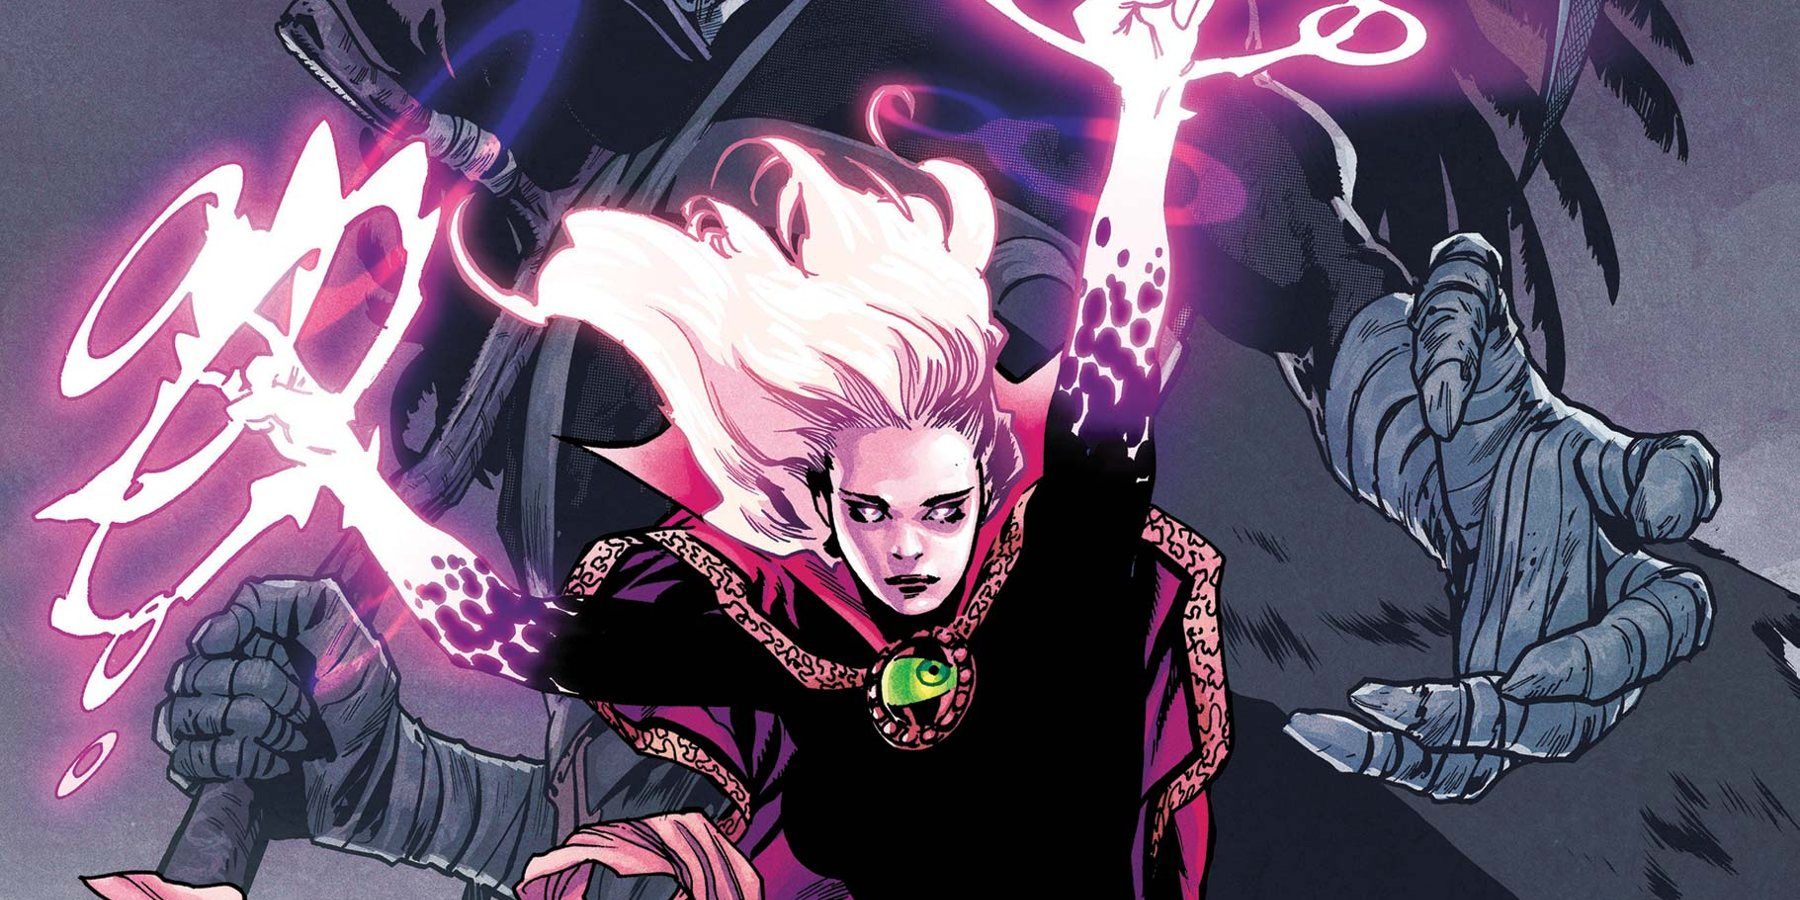 Clea uses magical powers in Marvel Comics.